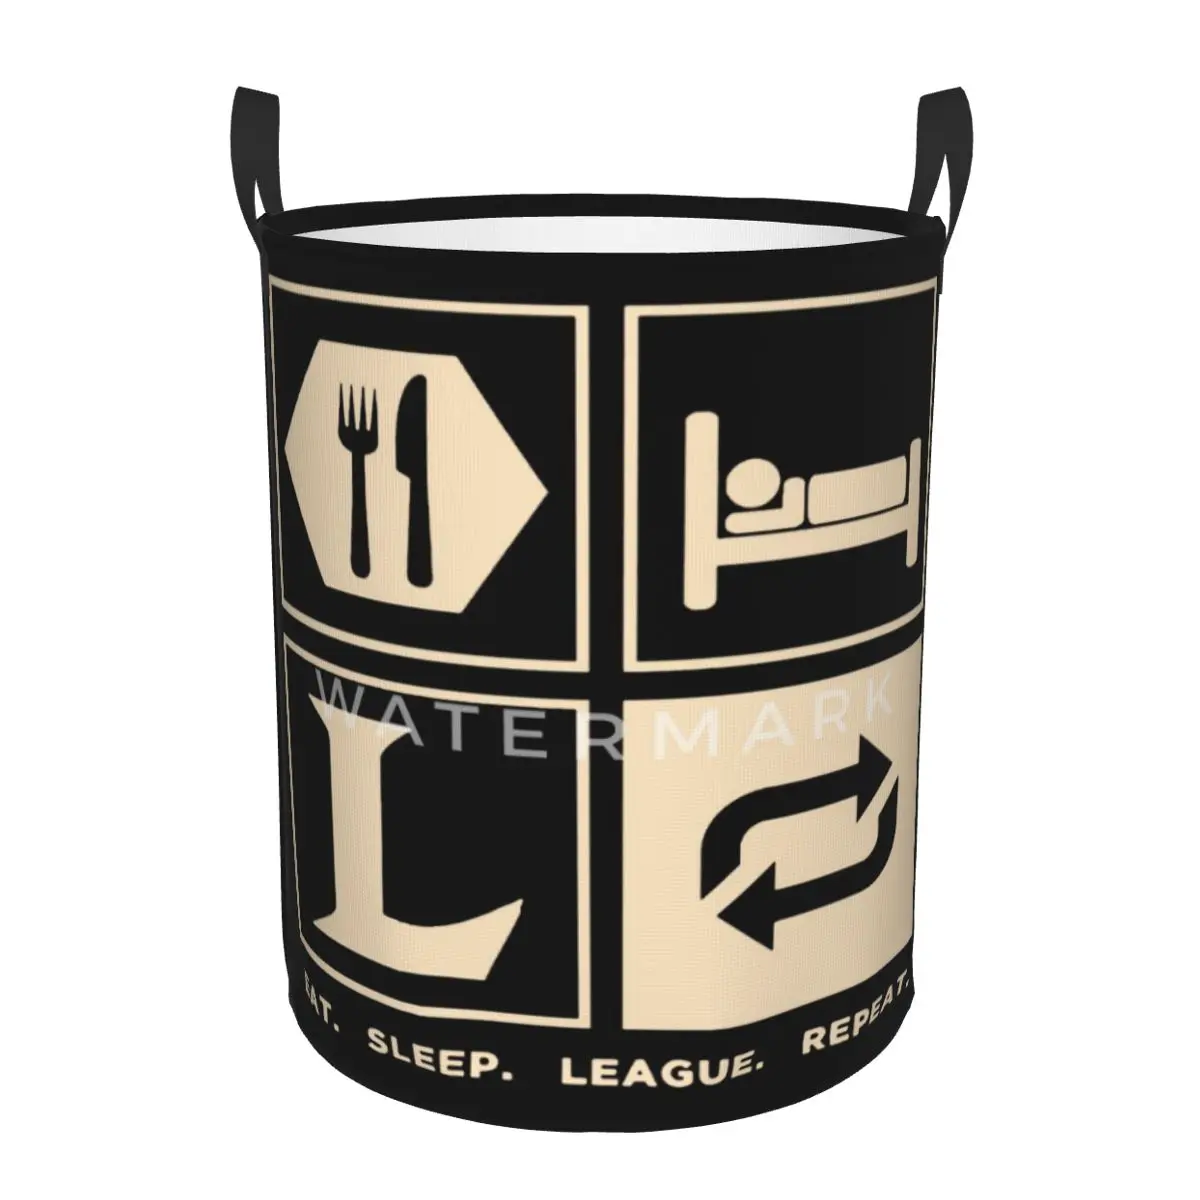 

League Of Legends Eat Sleep League Repeat Circular hamper,Storage Basket With Two handles bathrooms toys